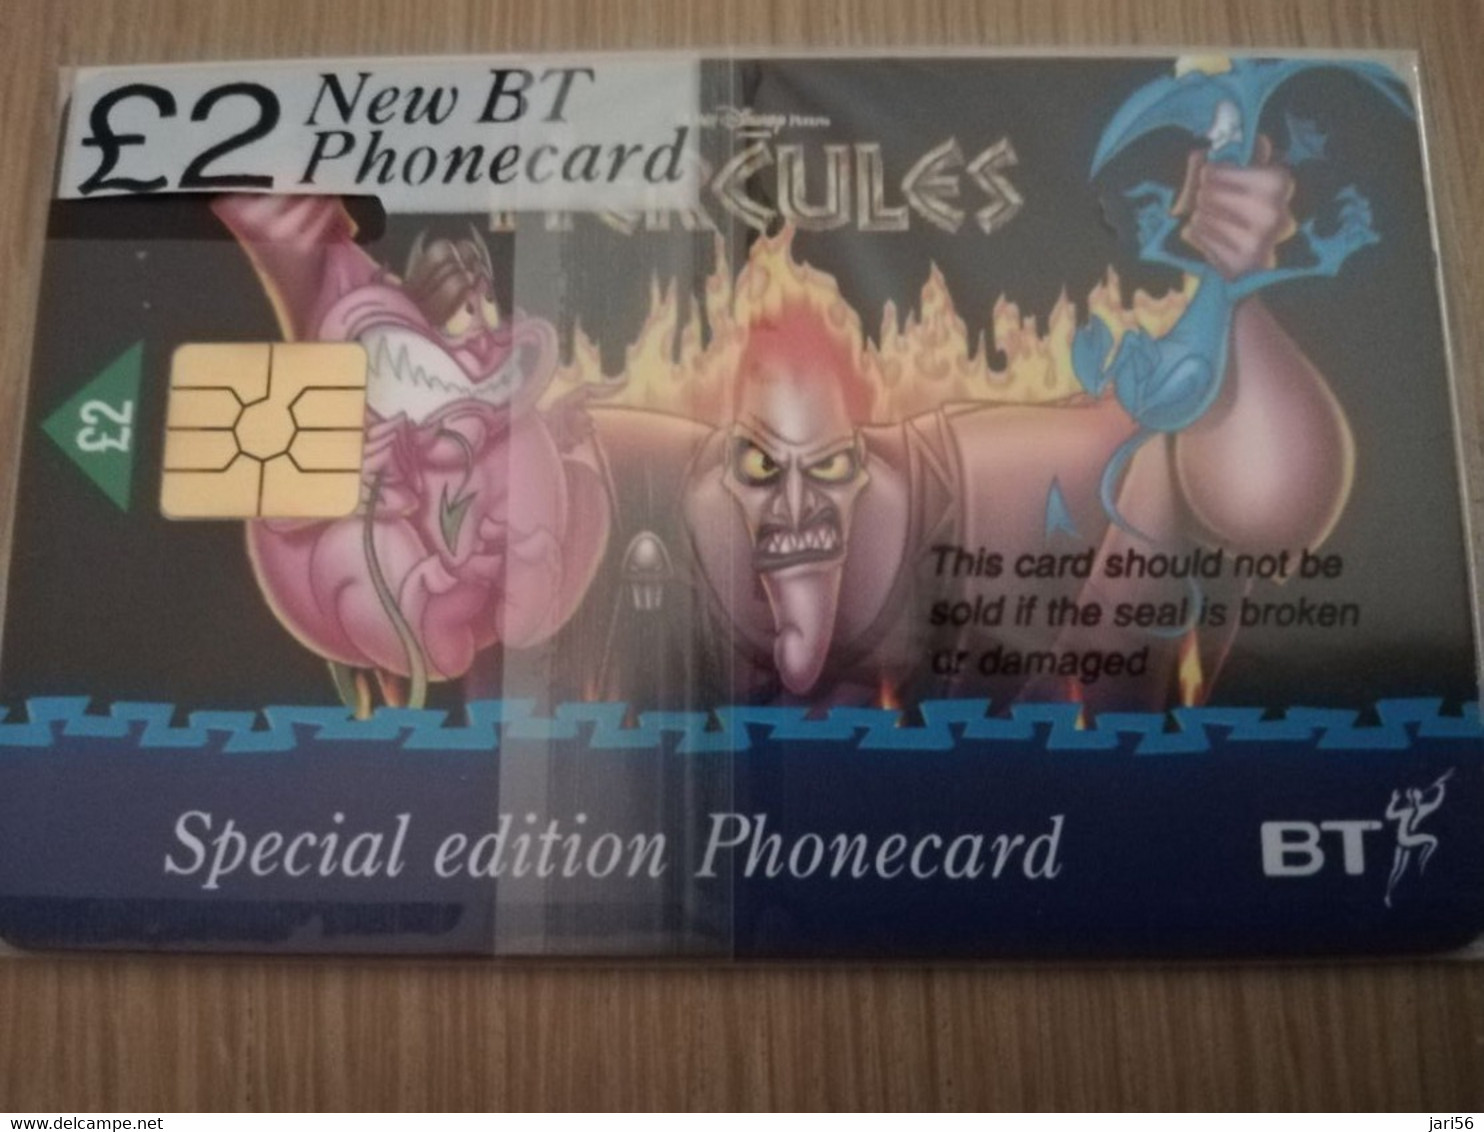 GREAT BRETAGNE  CHIPCARDS HERCULES/ DISNEY  SERIE 6X 2 POUND Sealed In Wrapper    MINT CONDITION      **3856** - BT Generales